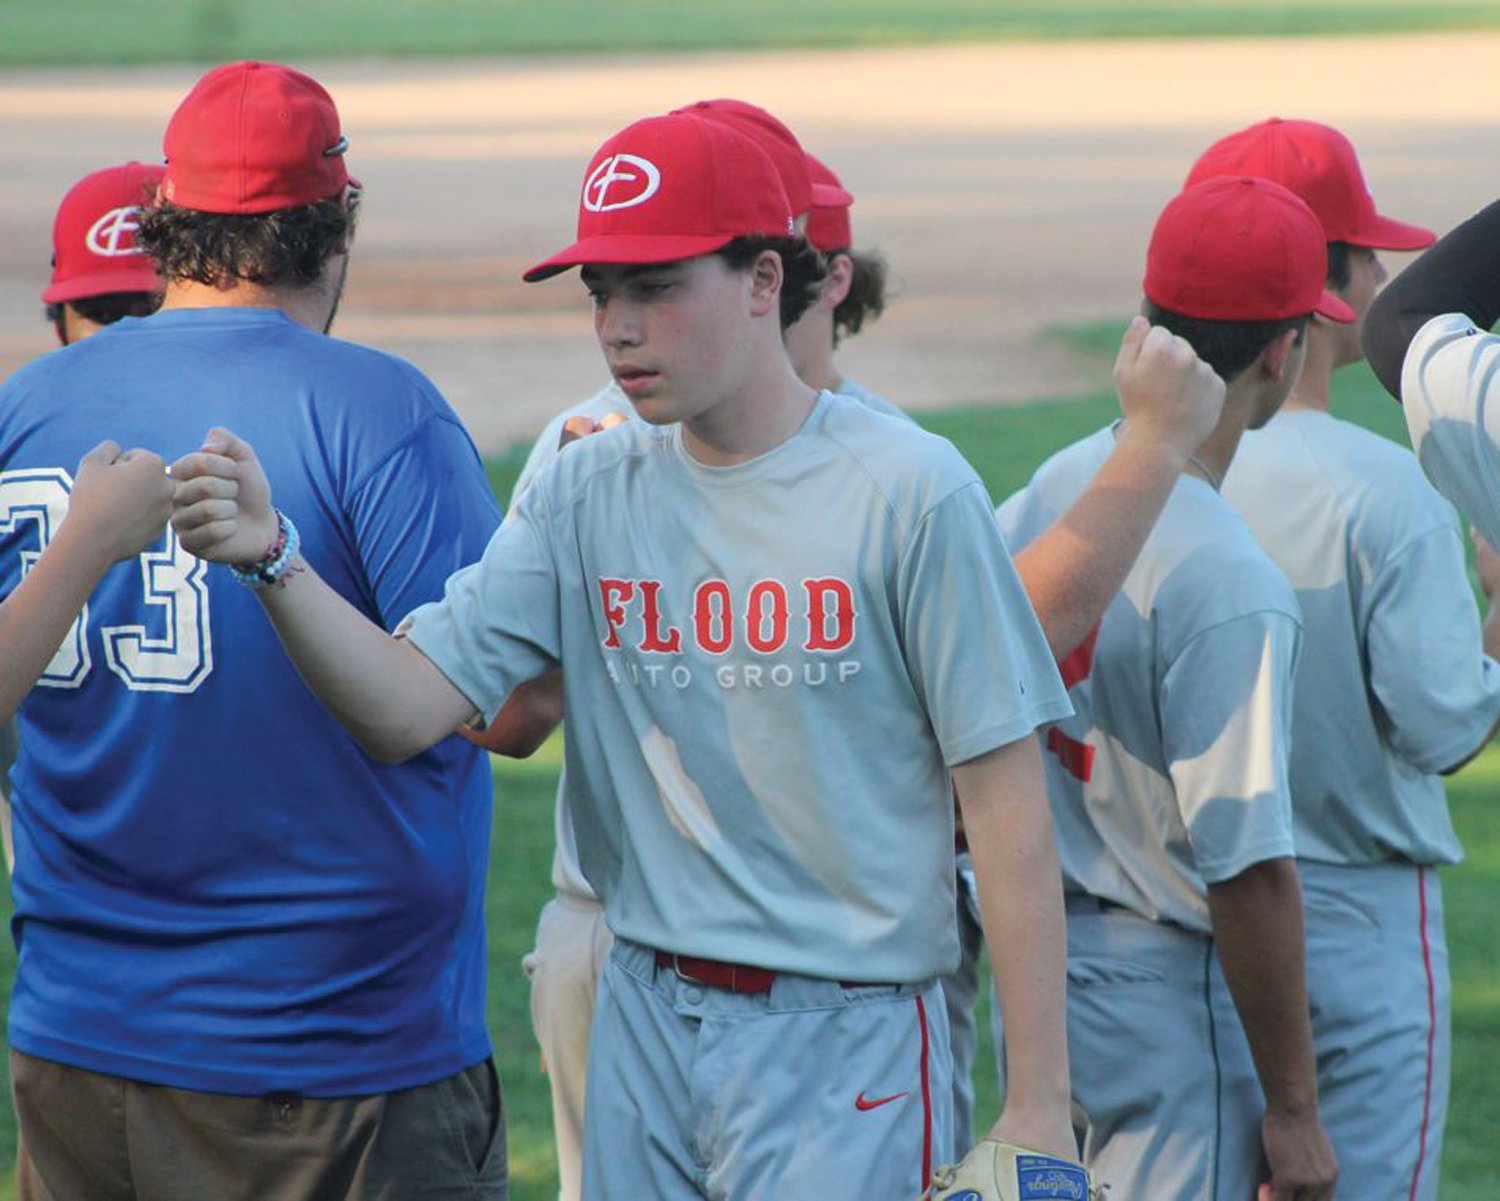 PLAYOFF BASEBALL: Members of Flood Ford fist
bump after an inning.